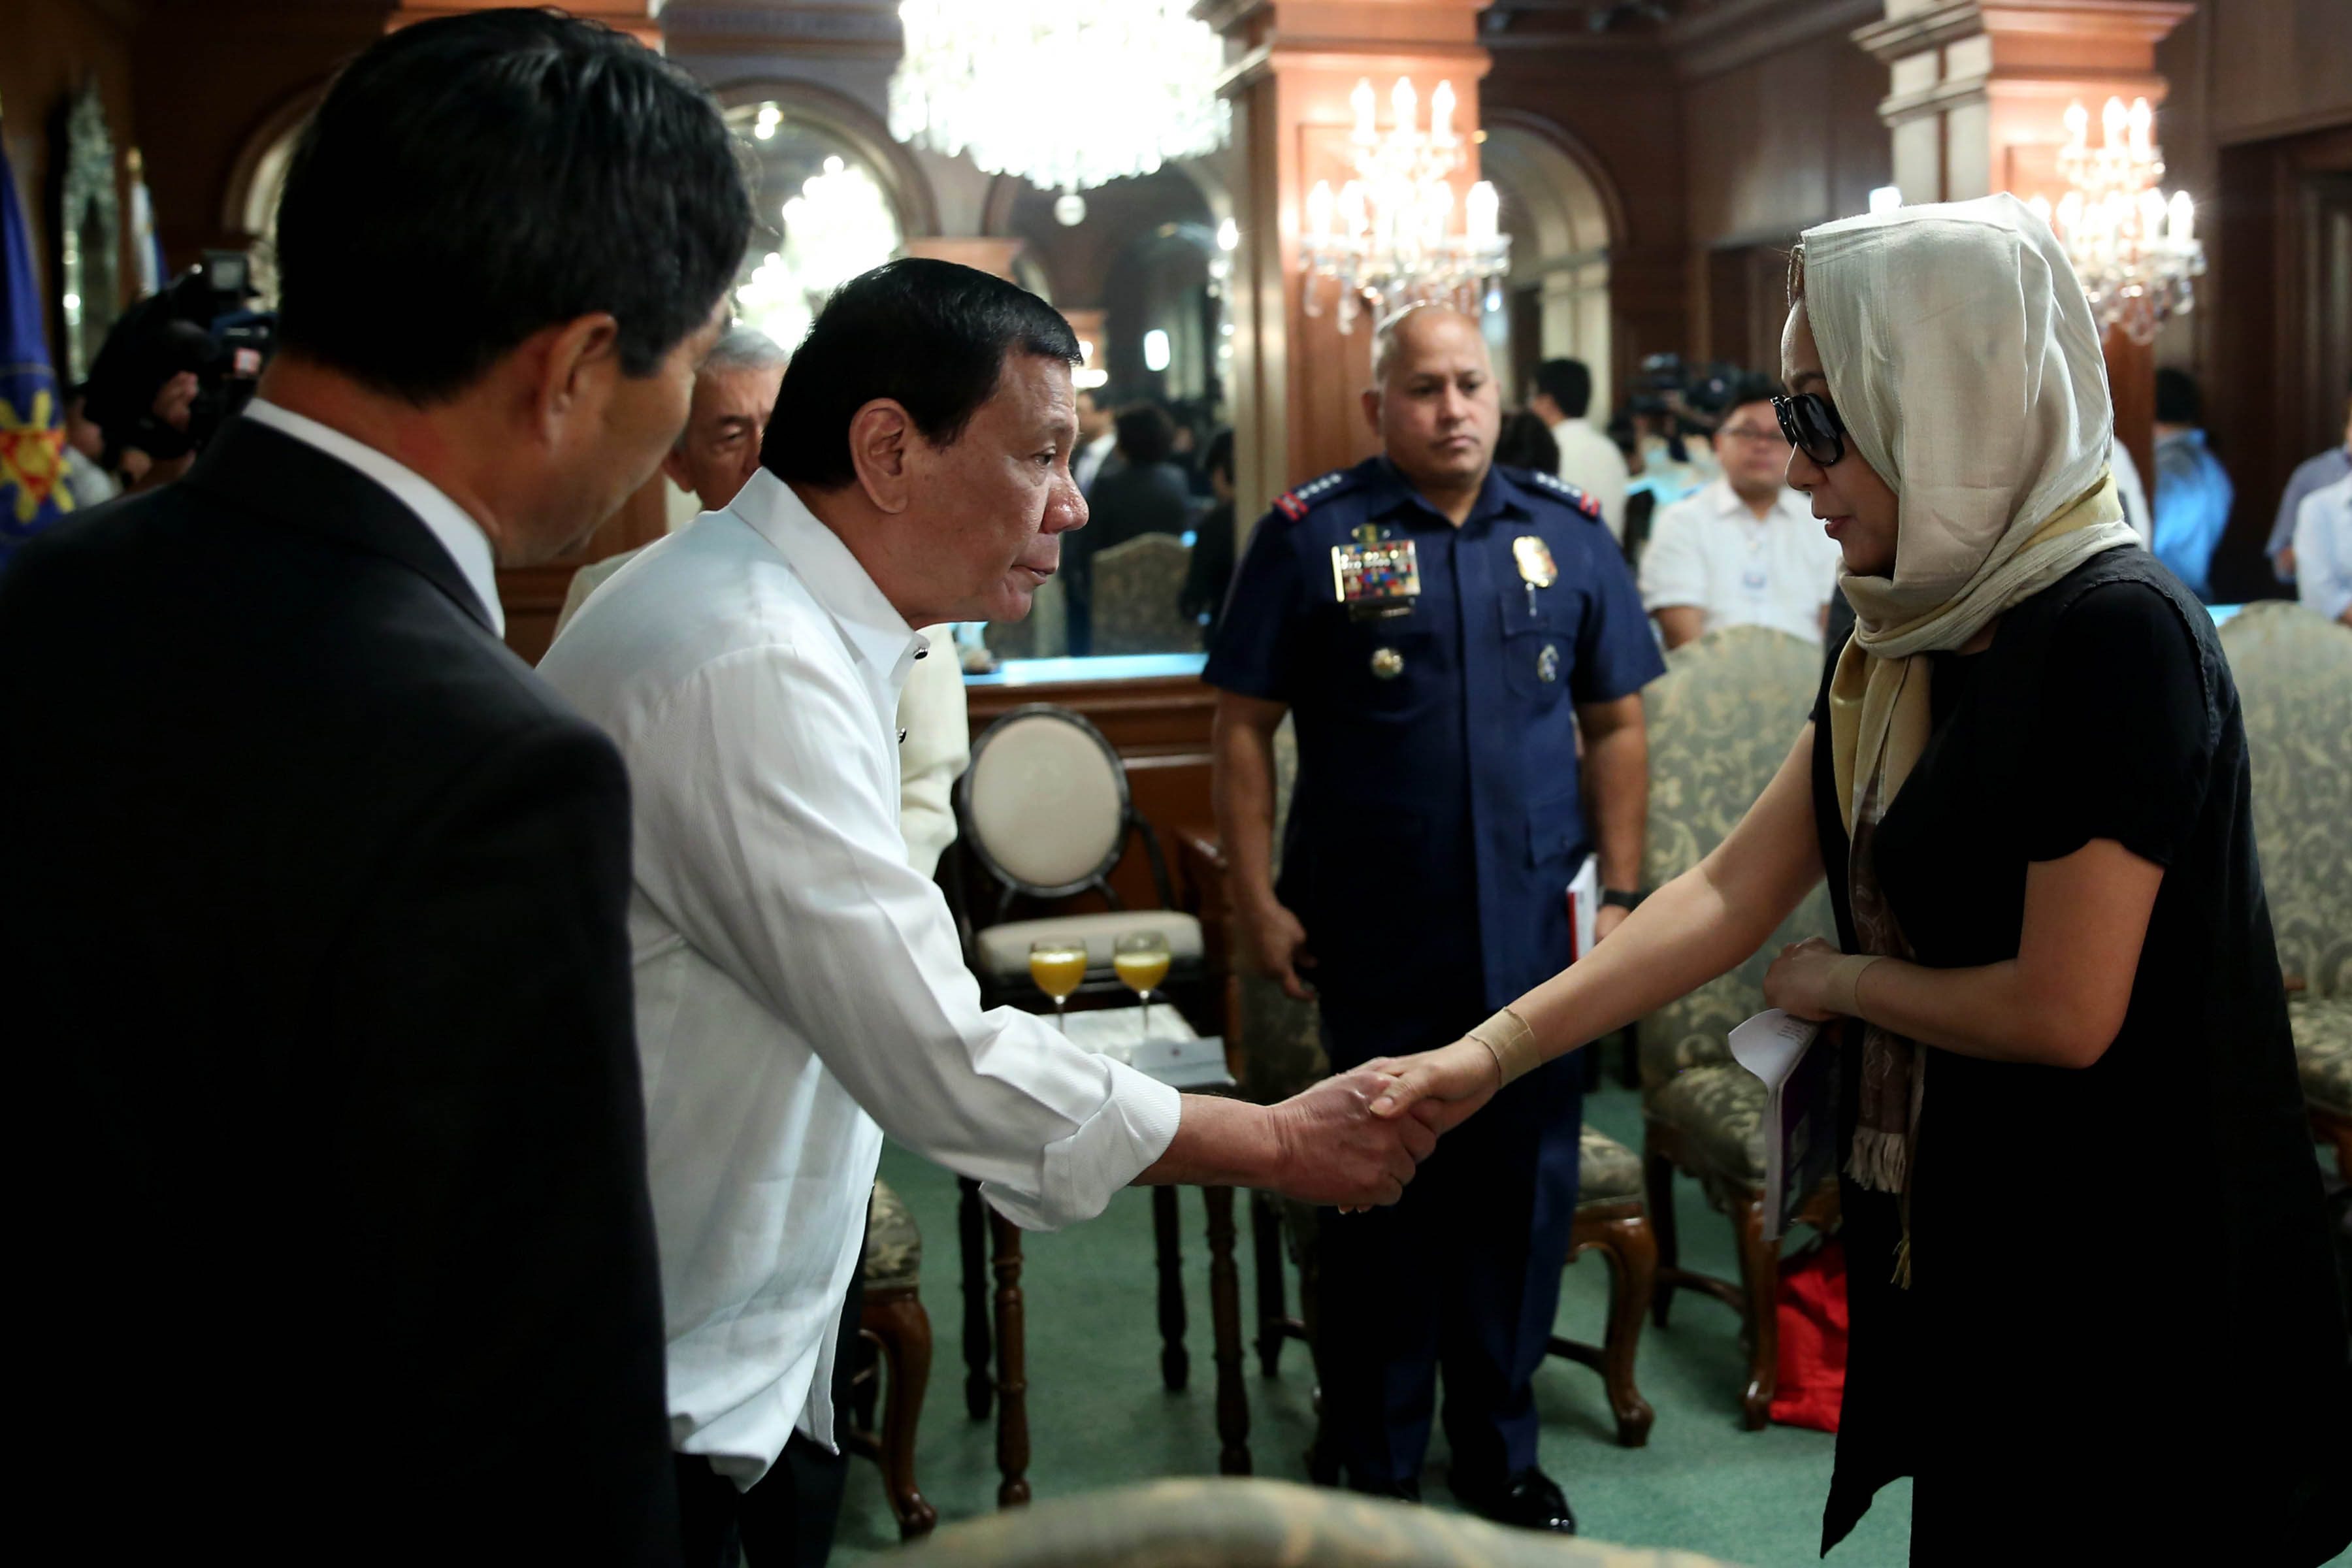 A PRESIDENT'S APOLOGY. President Rodrigo Duterte shakes hands with Choi Kyung-Jin, wife of the late Jee Ick Joo, during a meeting at the Palace on January 30, 2017. Photo by Rey Baniquet/Presidential Photo 